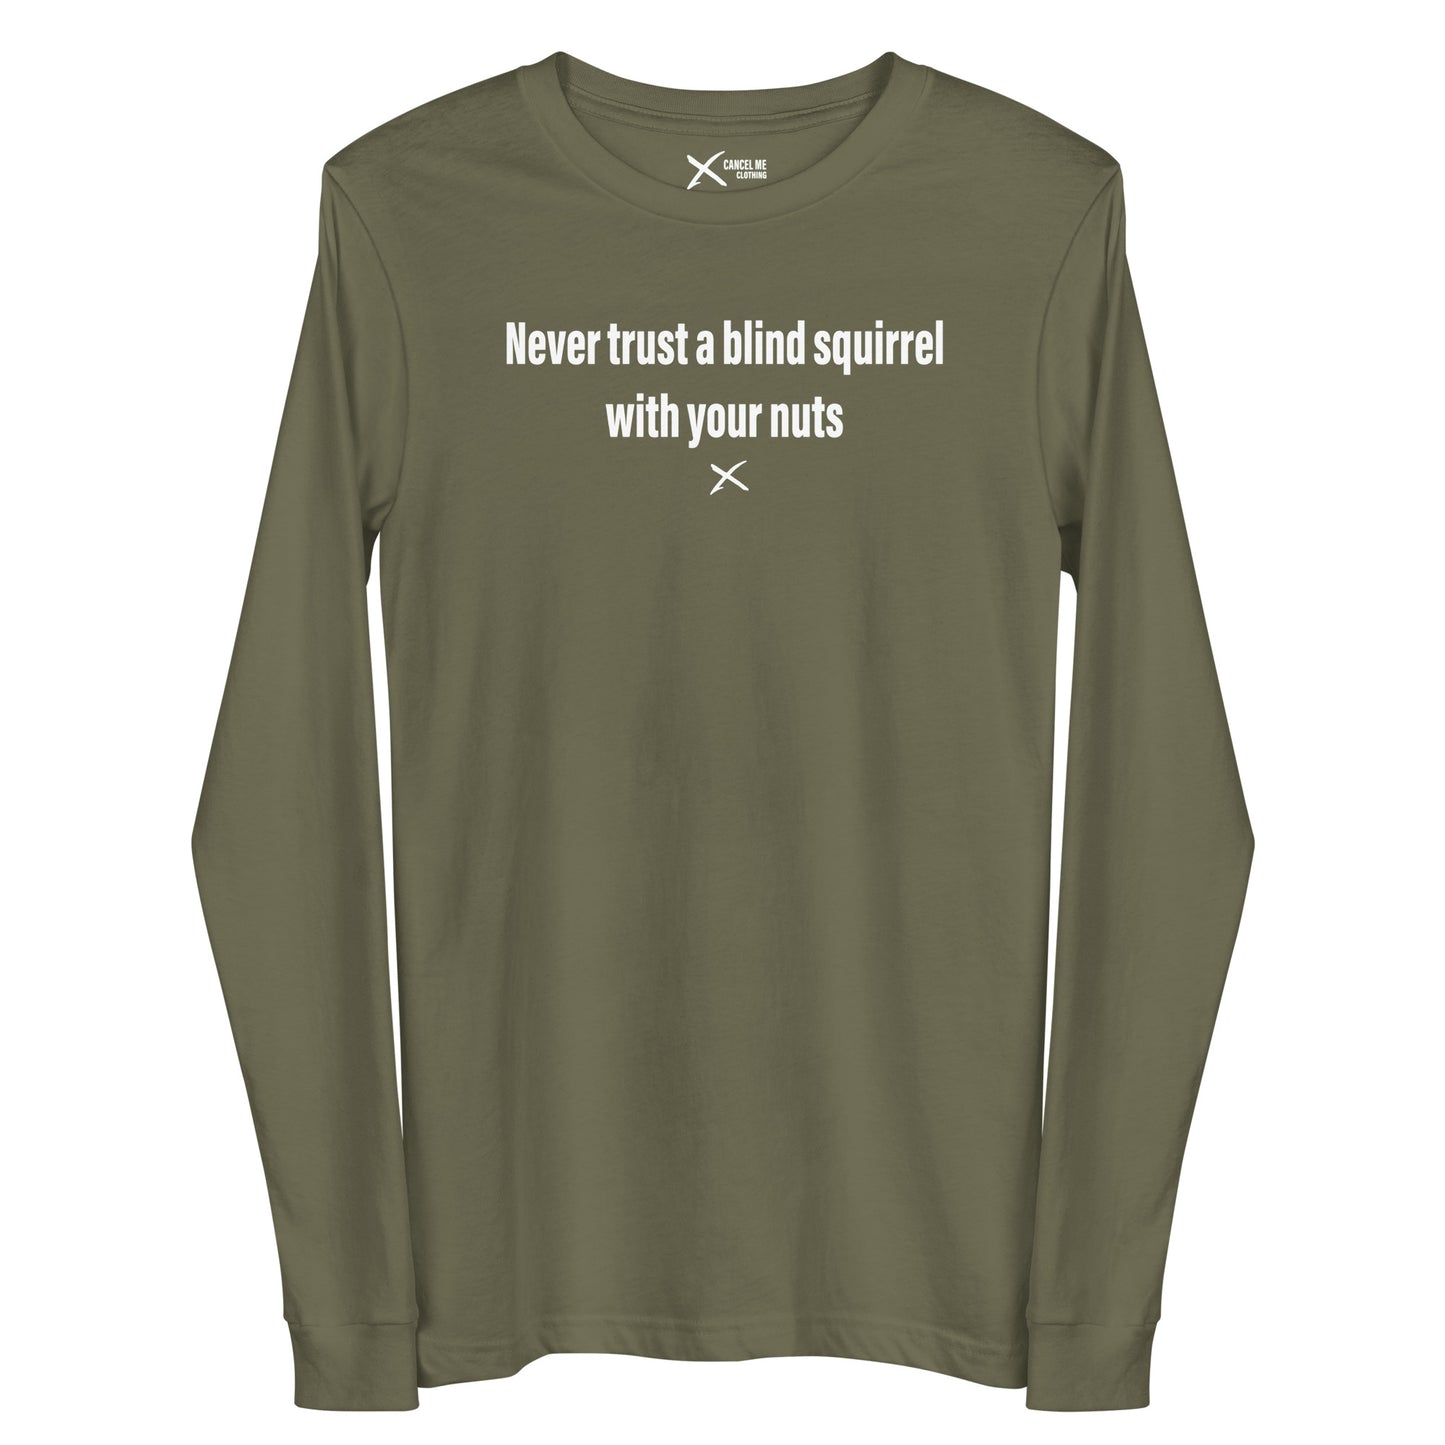 Never trust a blind squirrel with your nuts - Longsleeve